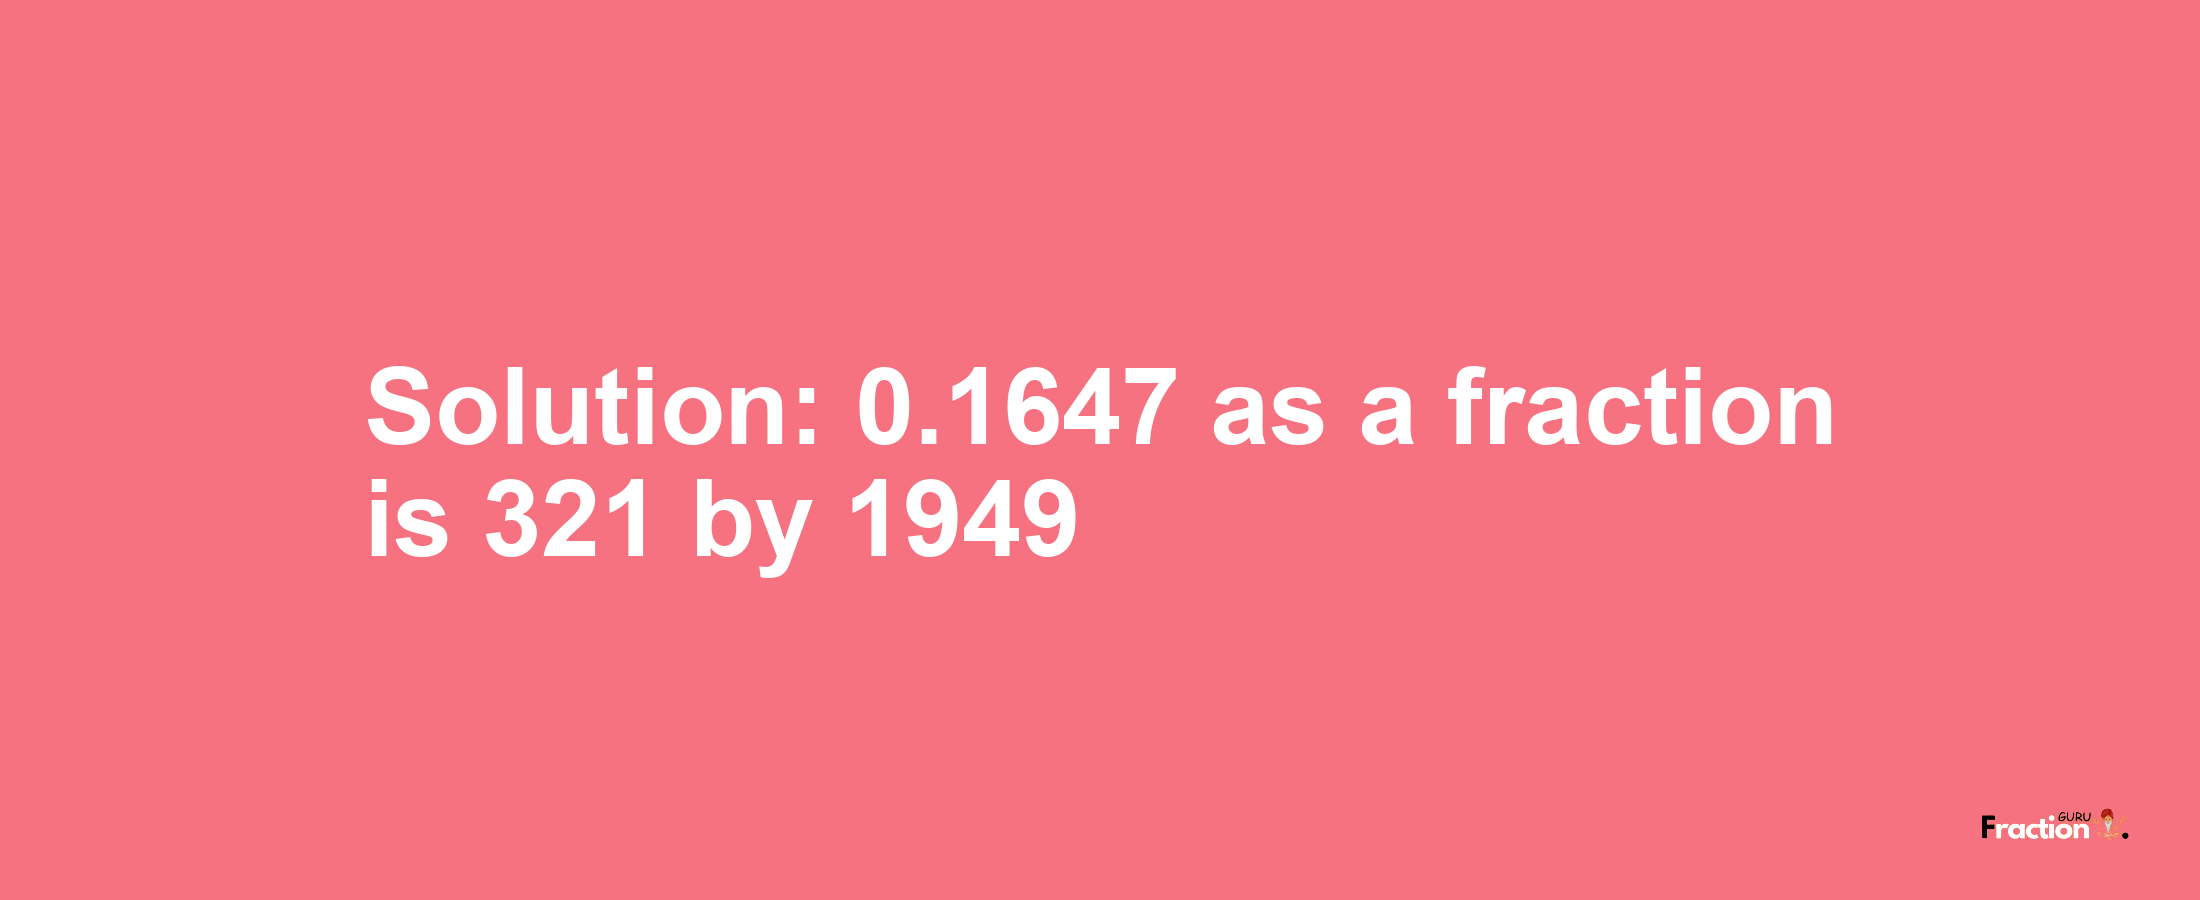 Solution:0.1647 as a fraction is 321/1949